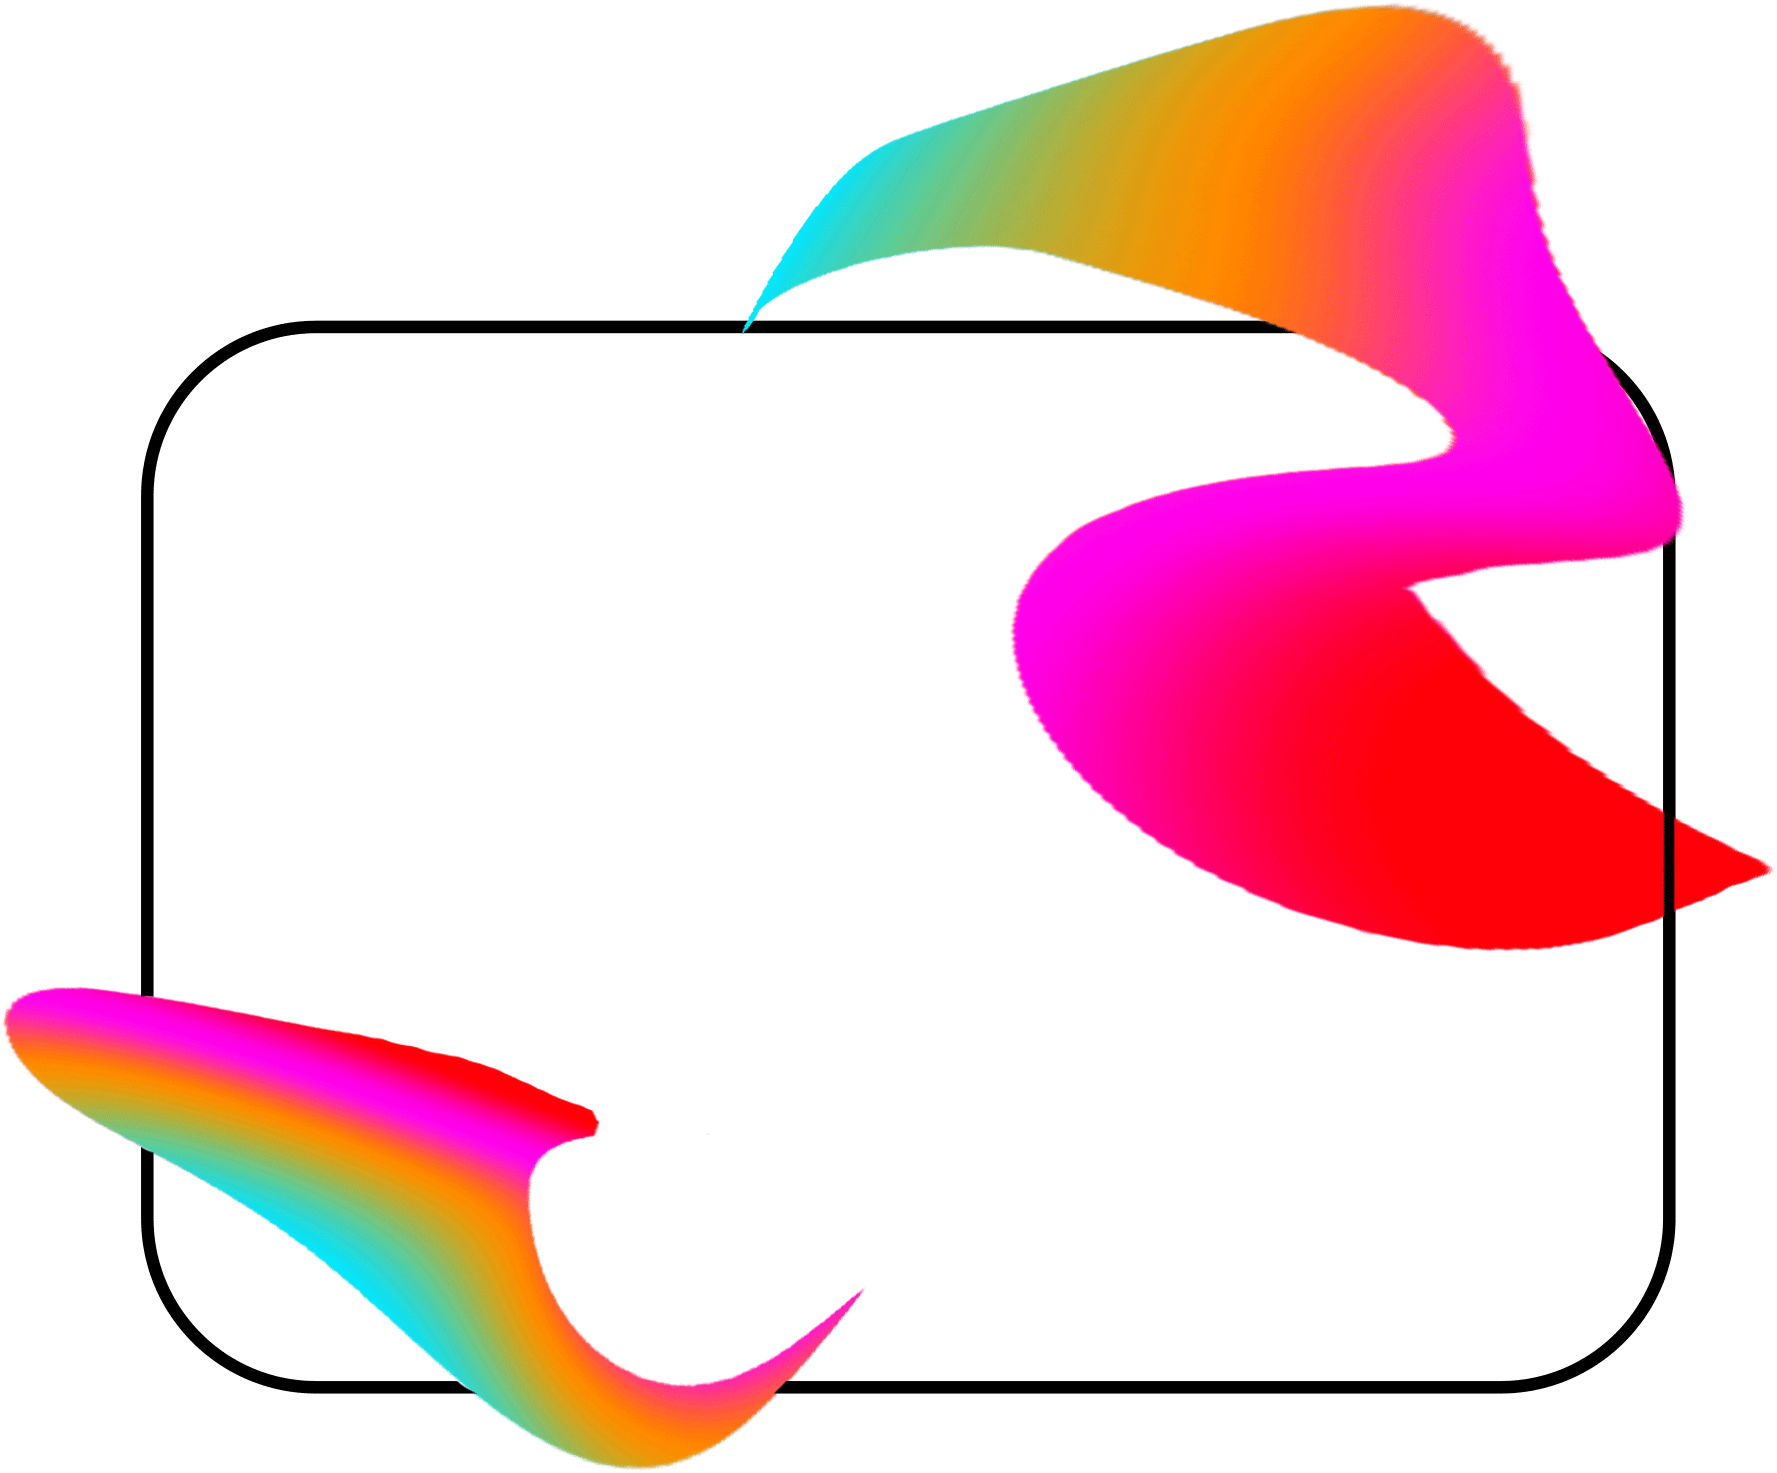 Abstract Colorful Swoosh Frame PNG image